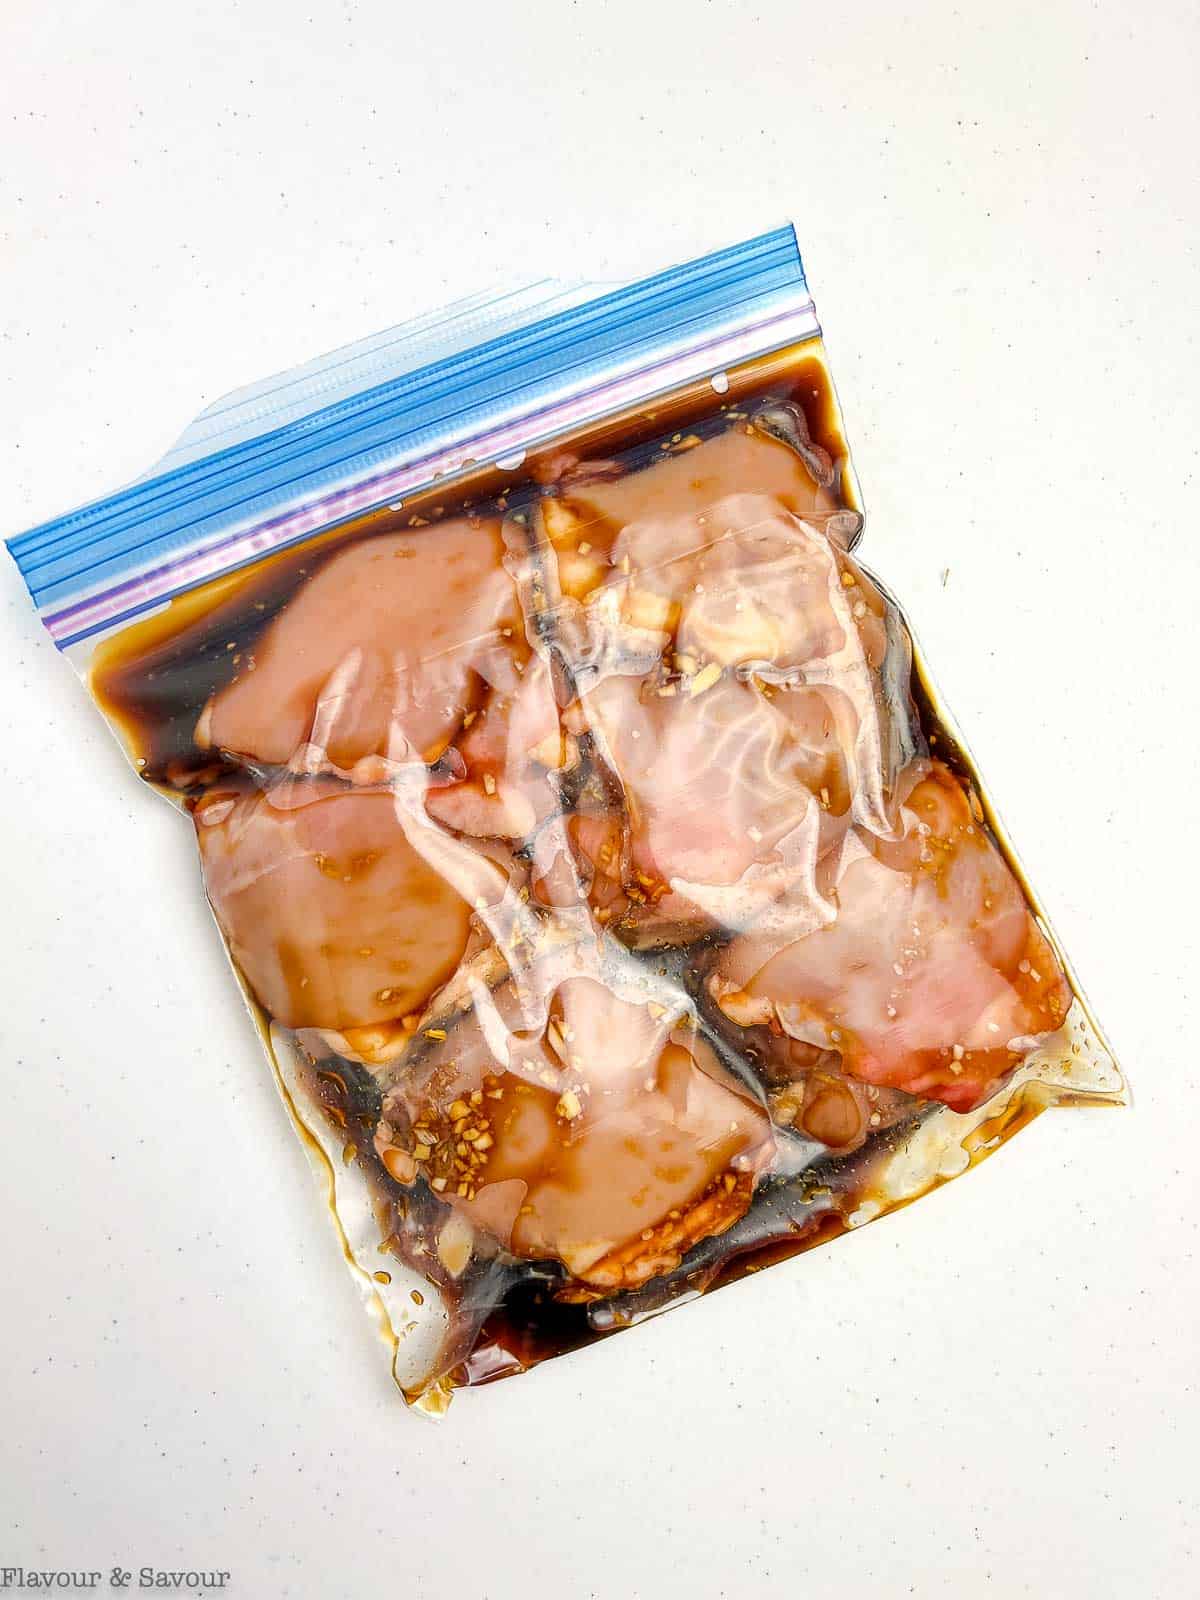 Chicken thighs with teriyaki marinade in a resealable bag.